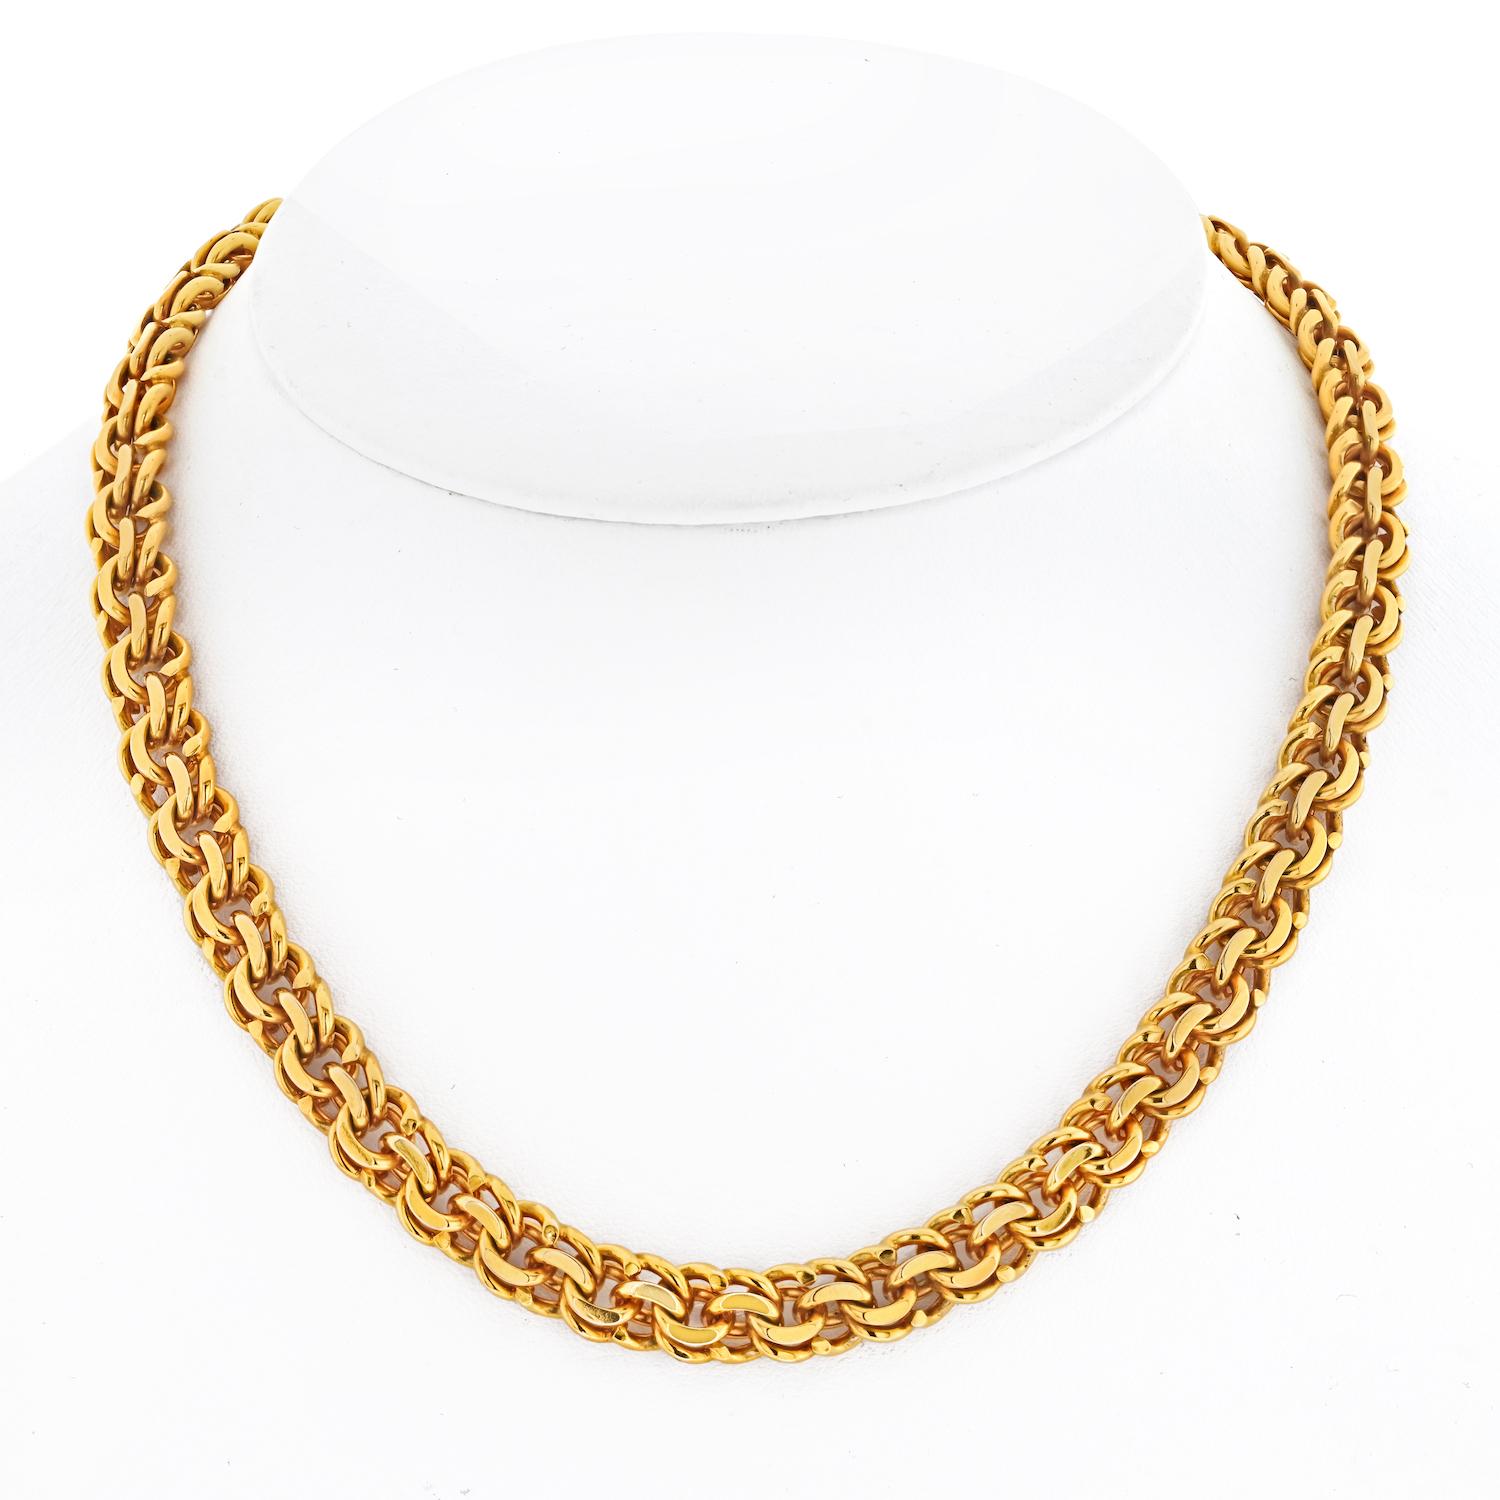 Looks like you are after a vintage style chain. What can be better than owning a vintage chain by Cartier? 
Vintage Cartier has always been in style but gold chains have made a comeback due to their timeless appeal and versatility. They can be worn